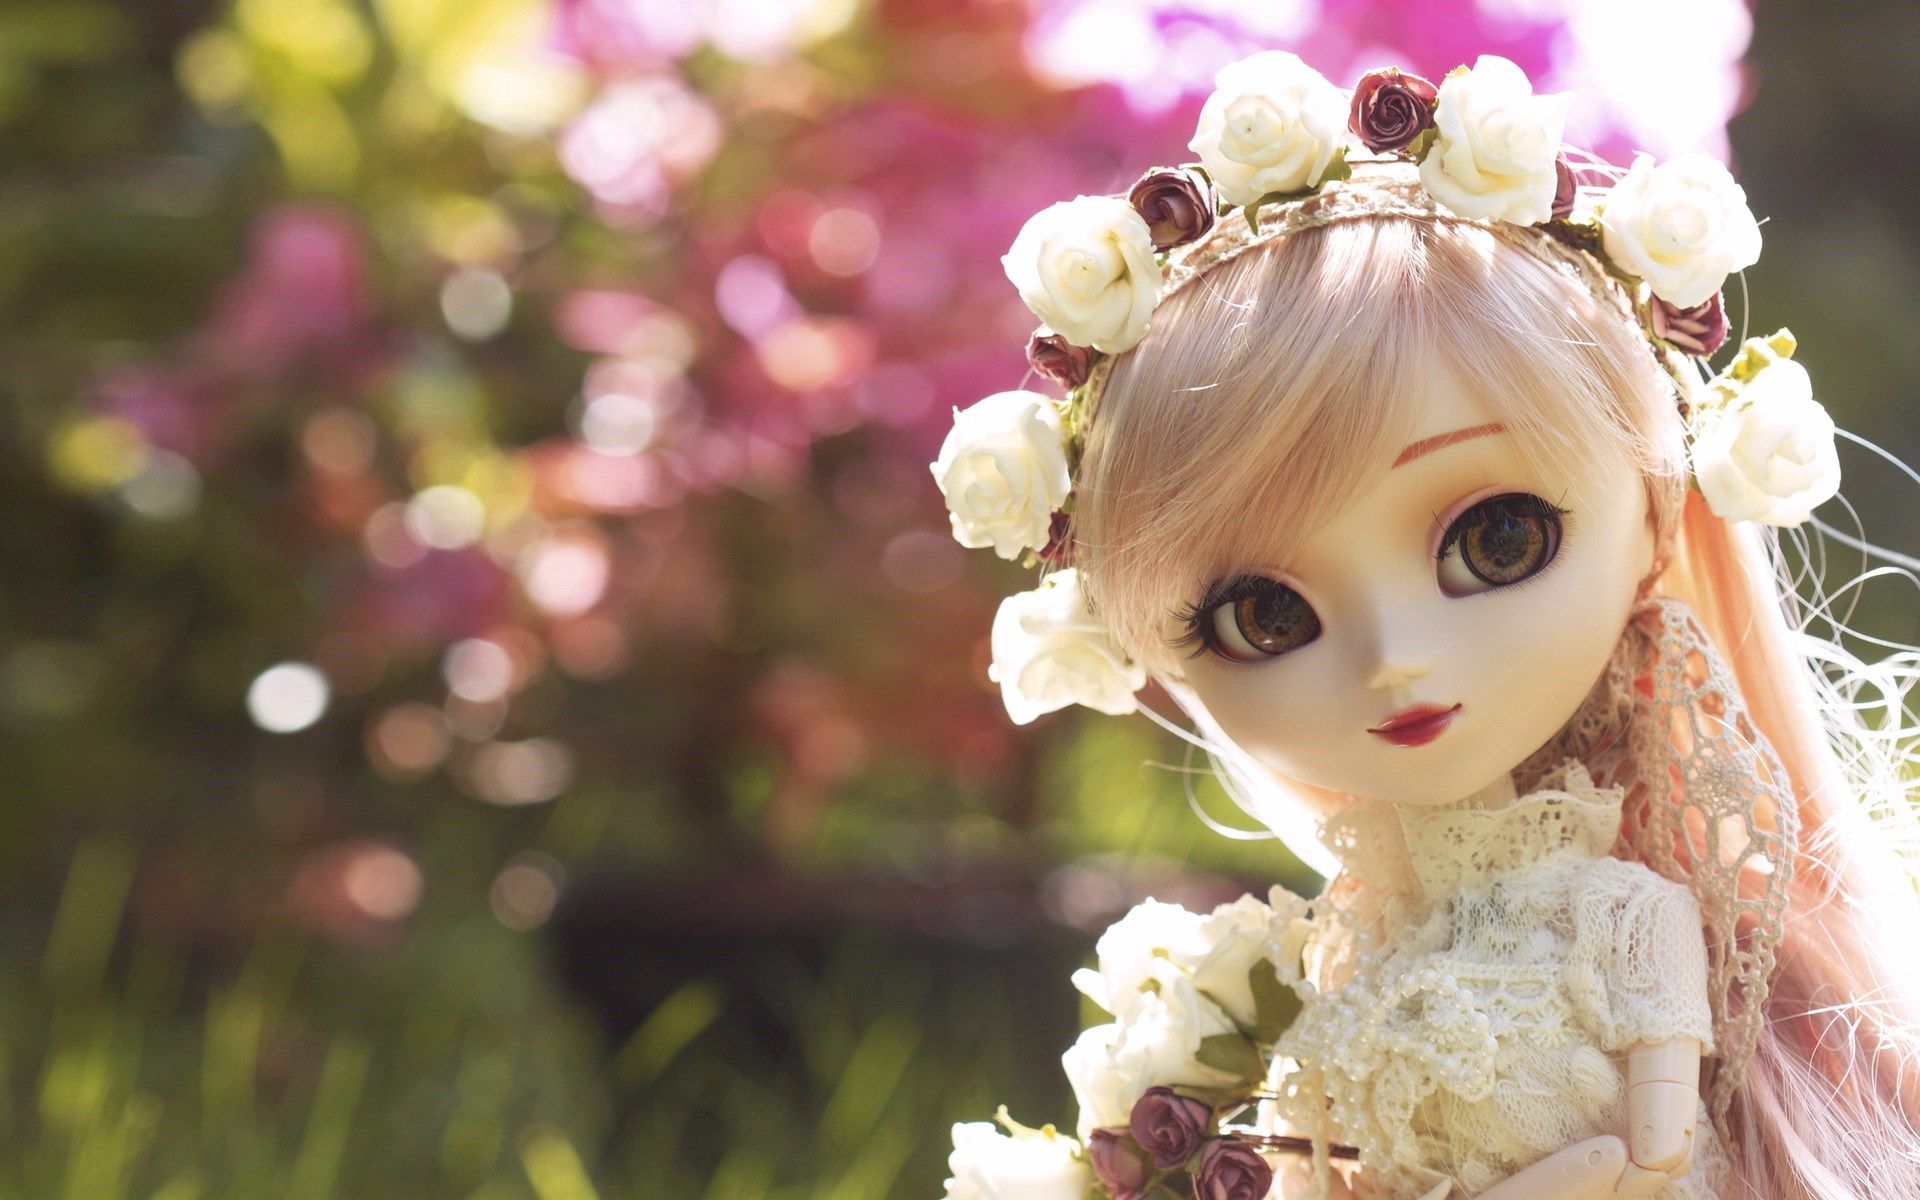 Cute Doll Wallpaper Hd For Mobile